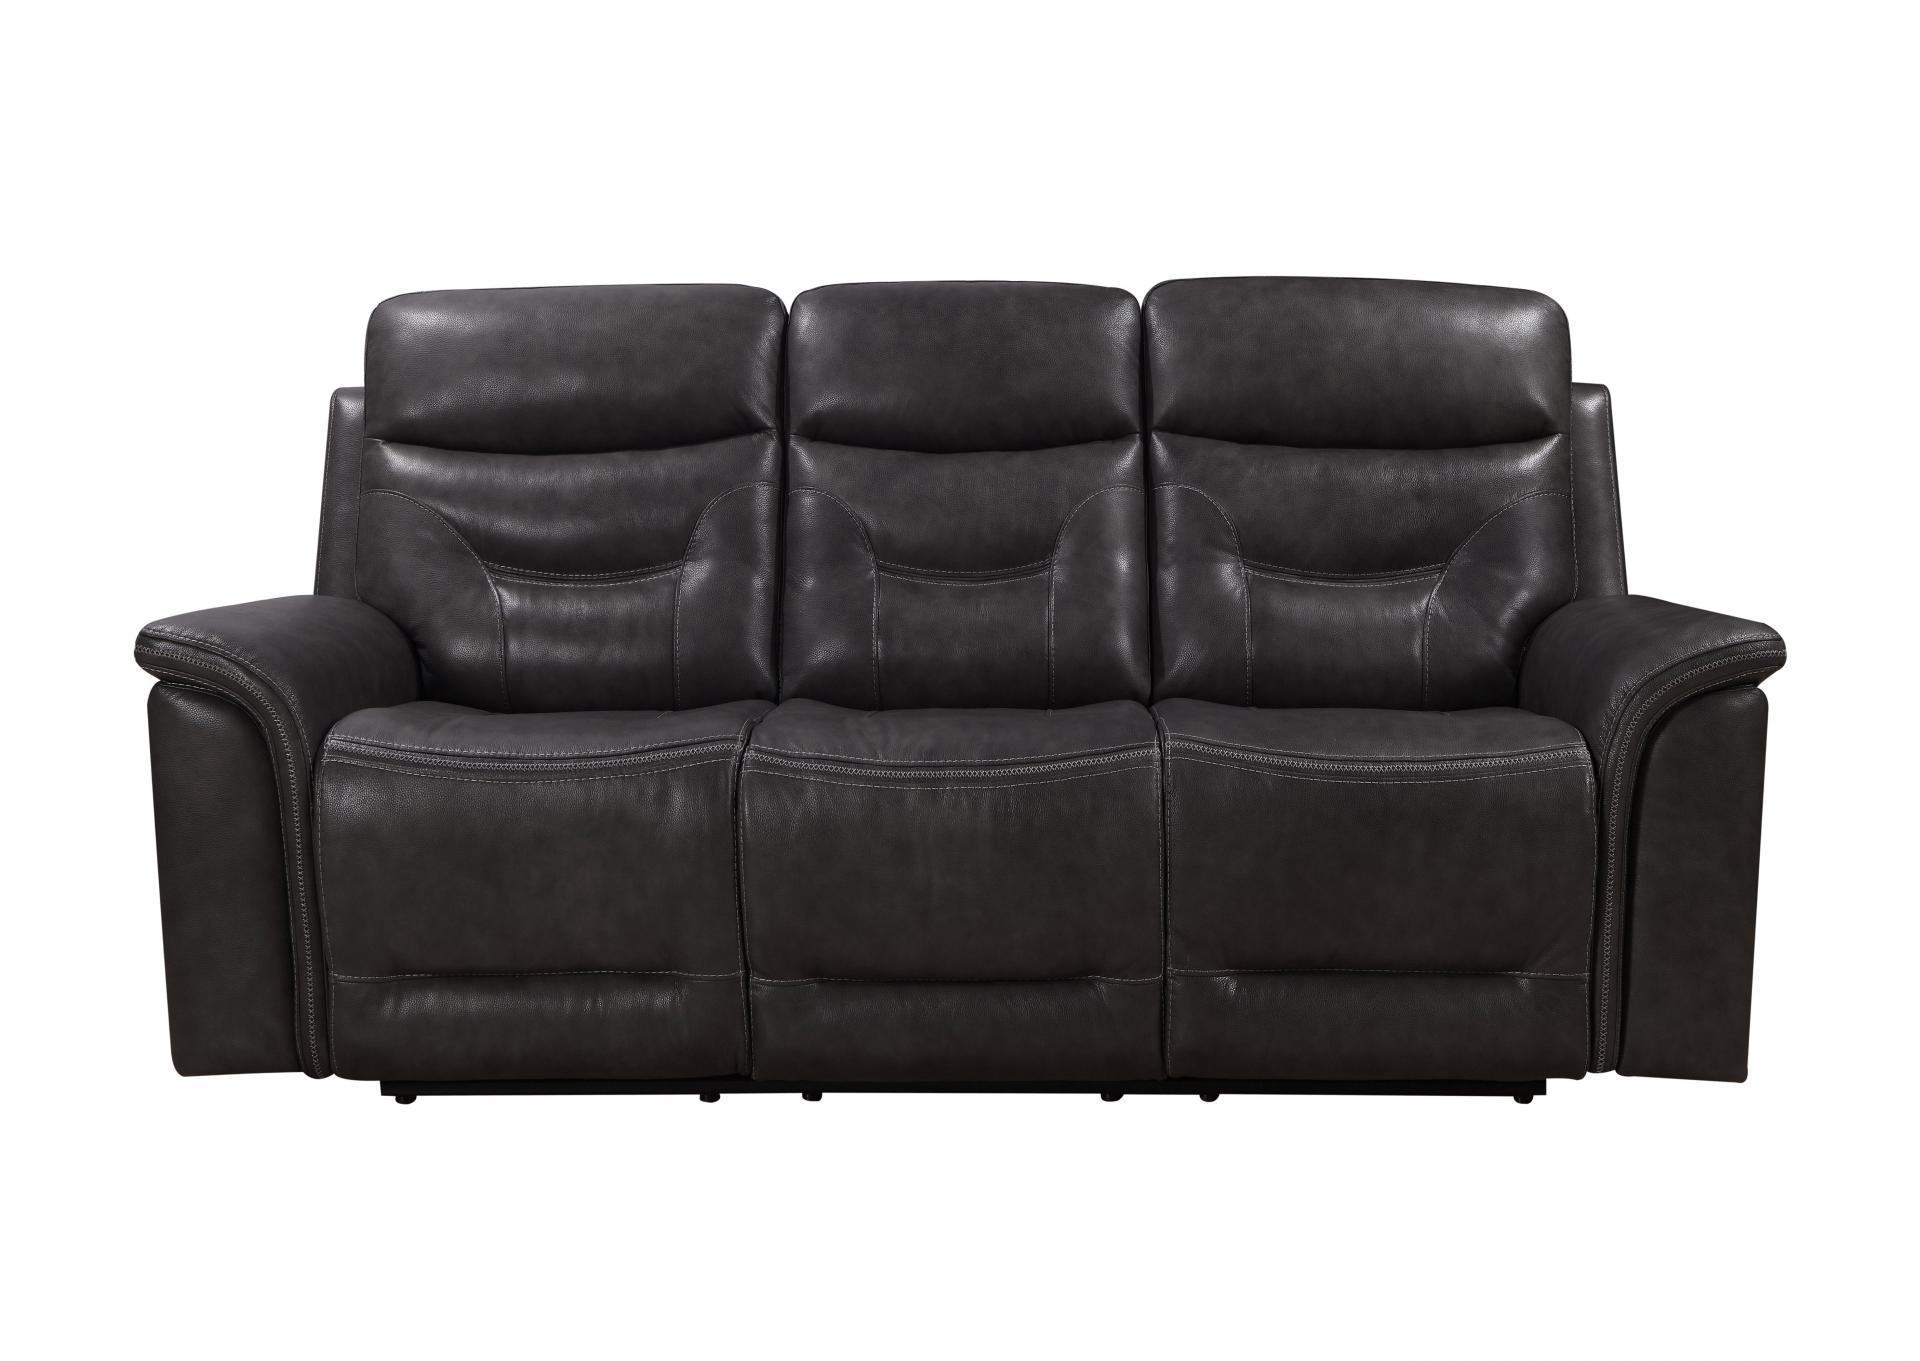 Gray Leather Dual Reclining Sofa and Love Seat with Console and Power Push Button